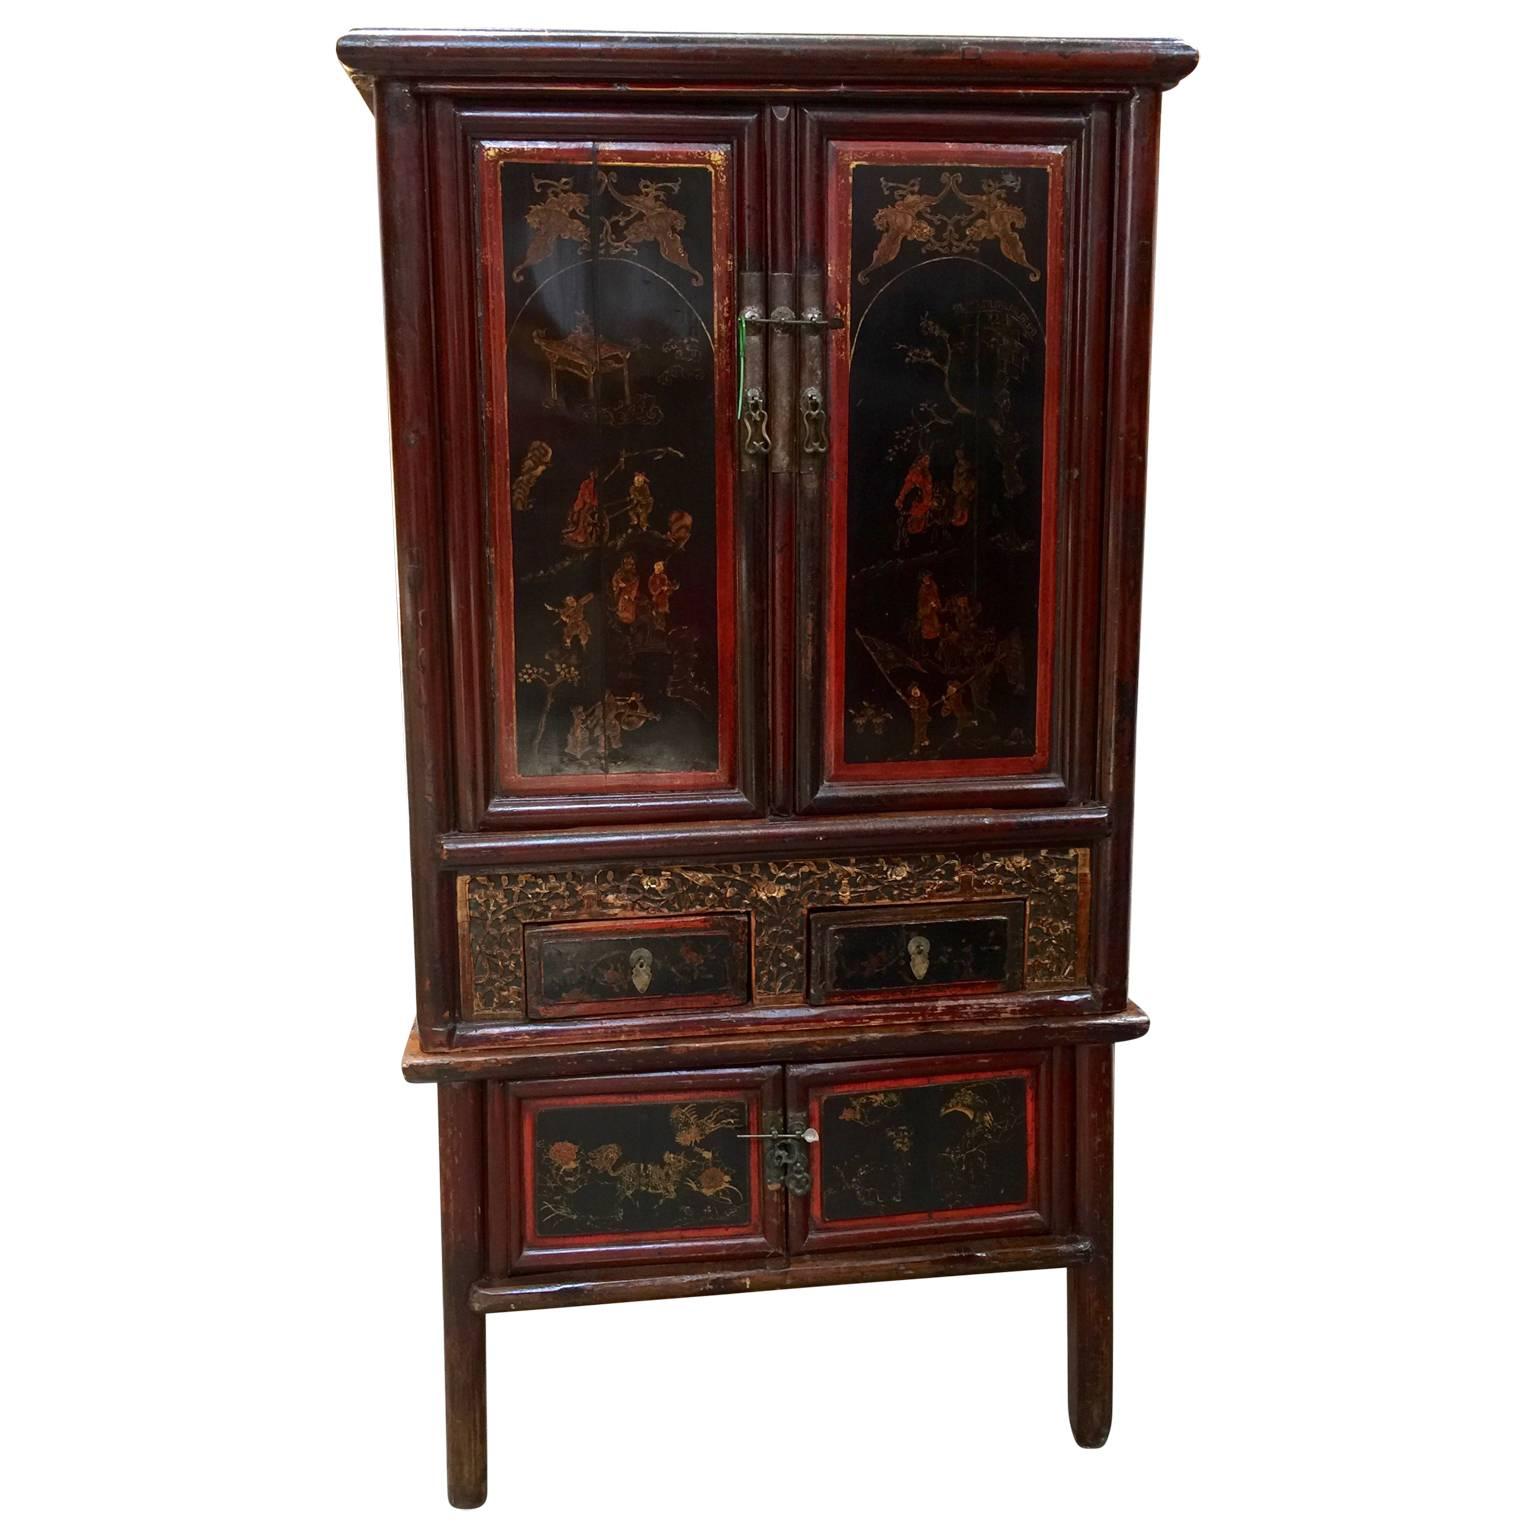 Beautiful Chinese cabinet in mainly black and red lacquer with red decorations. Contains several shelves and four drawers, all with original brass hardware.